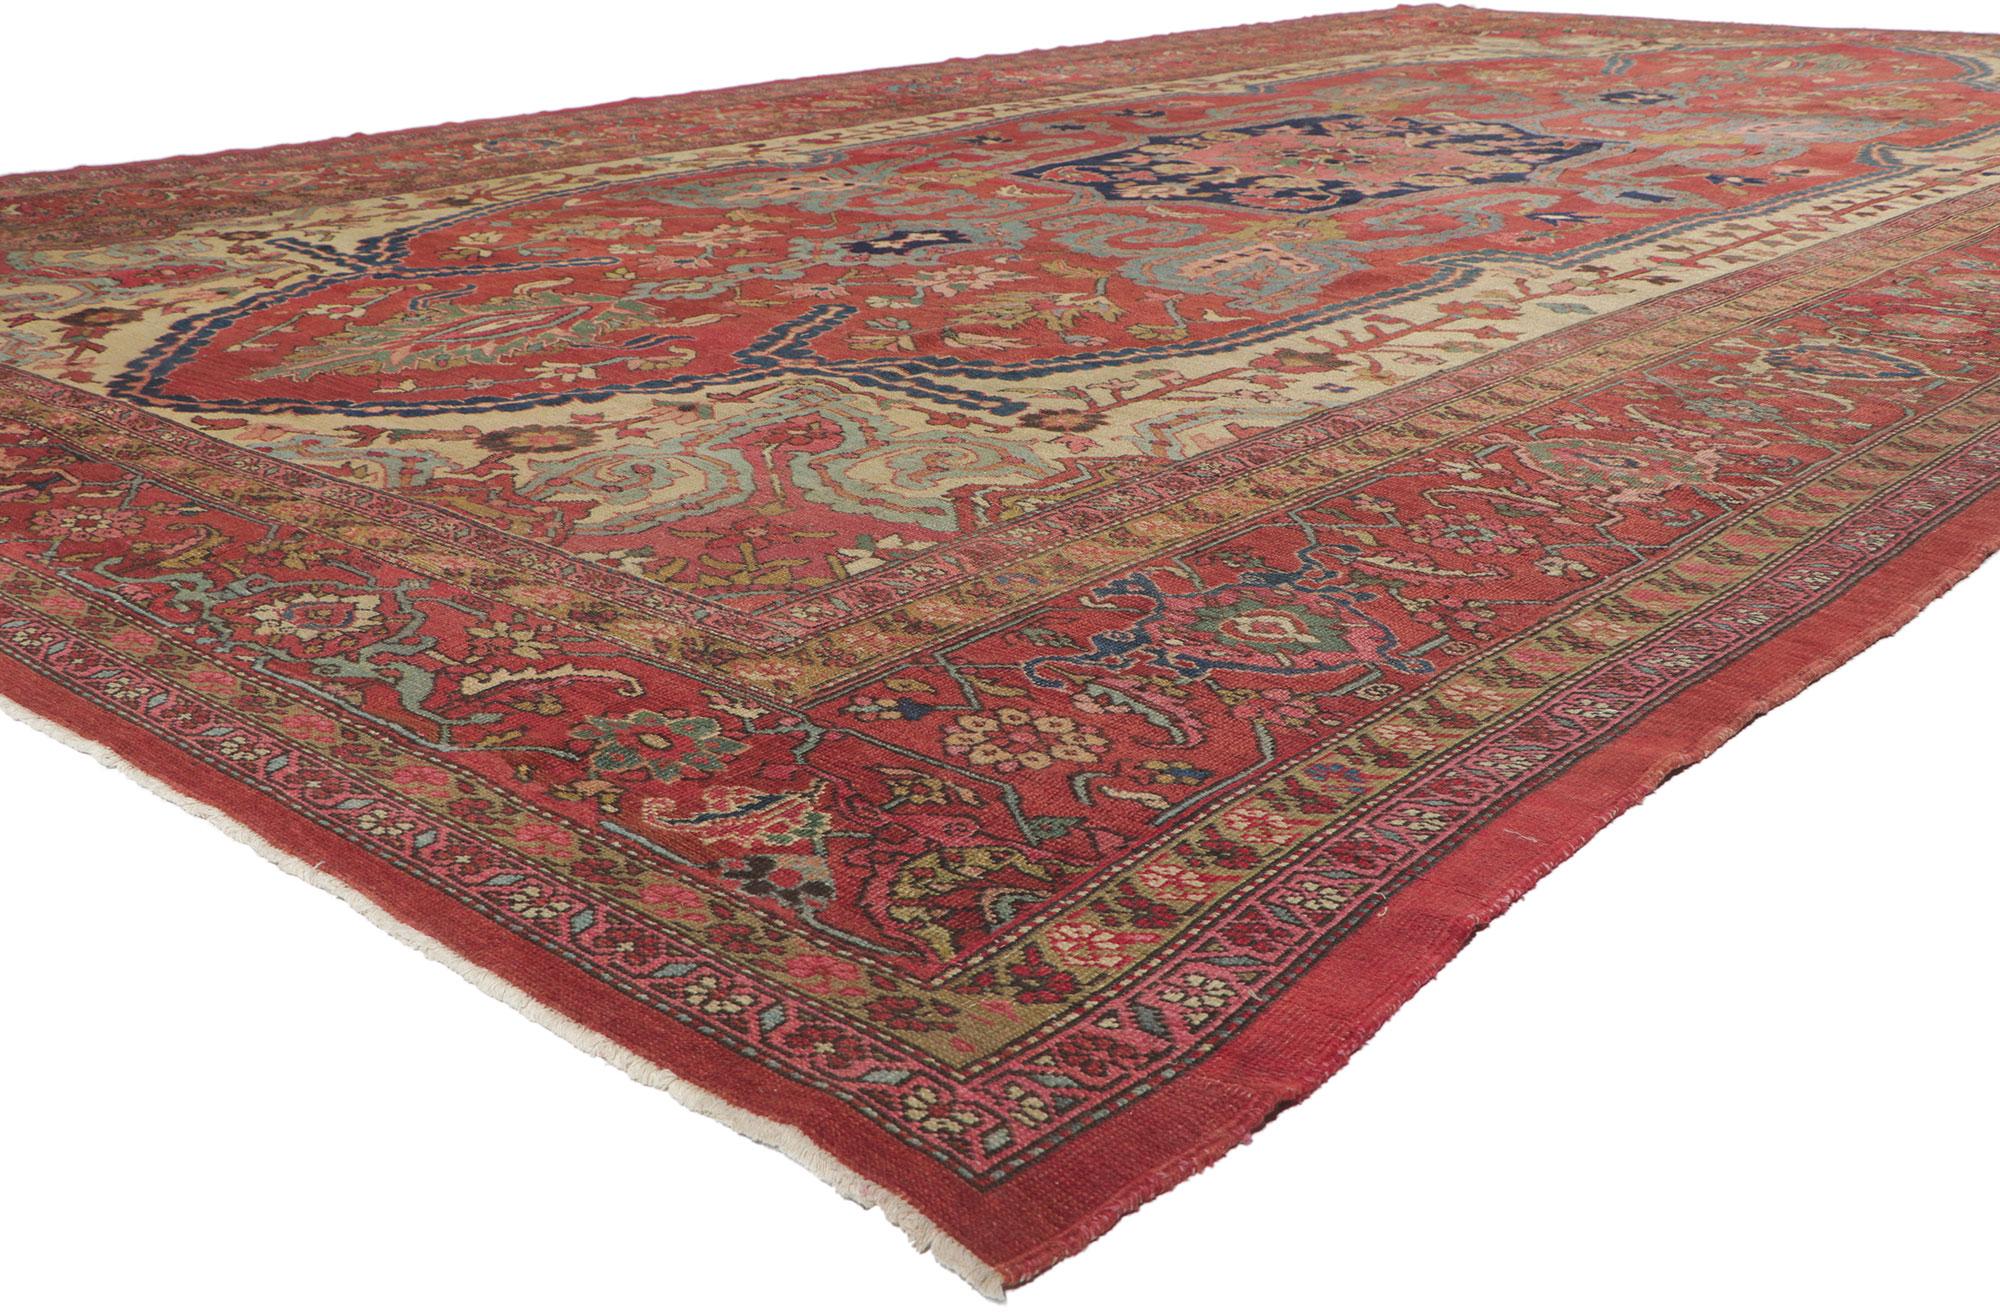 77359 Antique Persian Bakshaish Rug, 11'05 x 19'04. 
Timeless appeal meets perpetually posh in this hand knotted wool antique Persian Bakshaish rug. The decorative detailing and sophisticated color palette woven into this piece work together